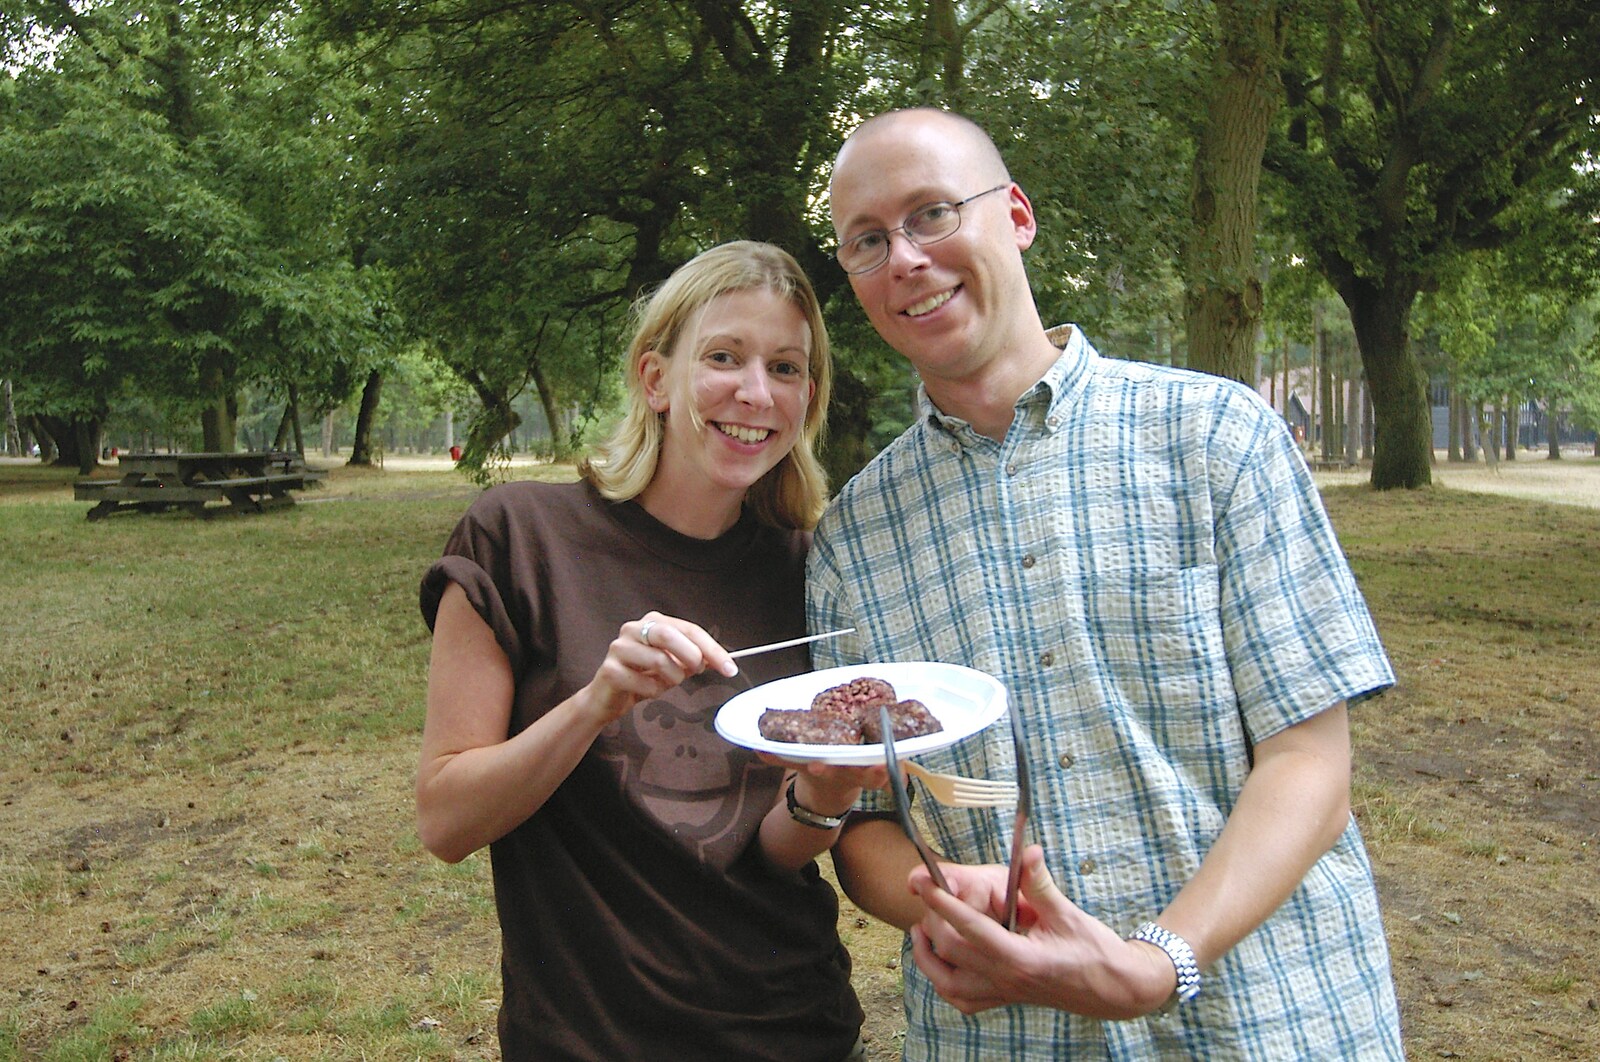 Lucy and Marc from Qualcomm Cambridge "Go Ape", High Lodge, Thetford Forest - 27th July 2006